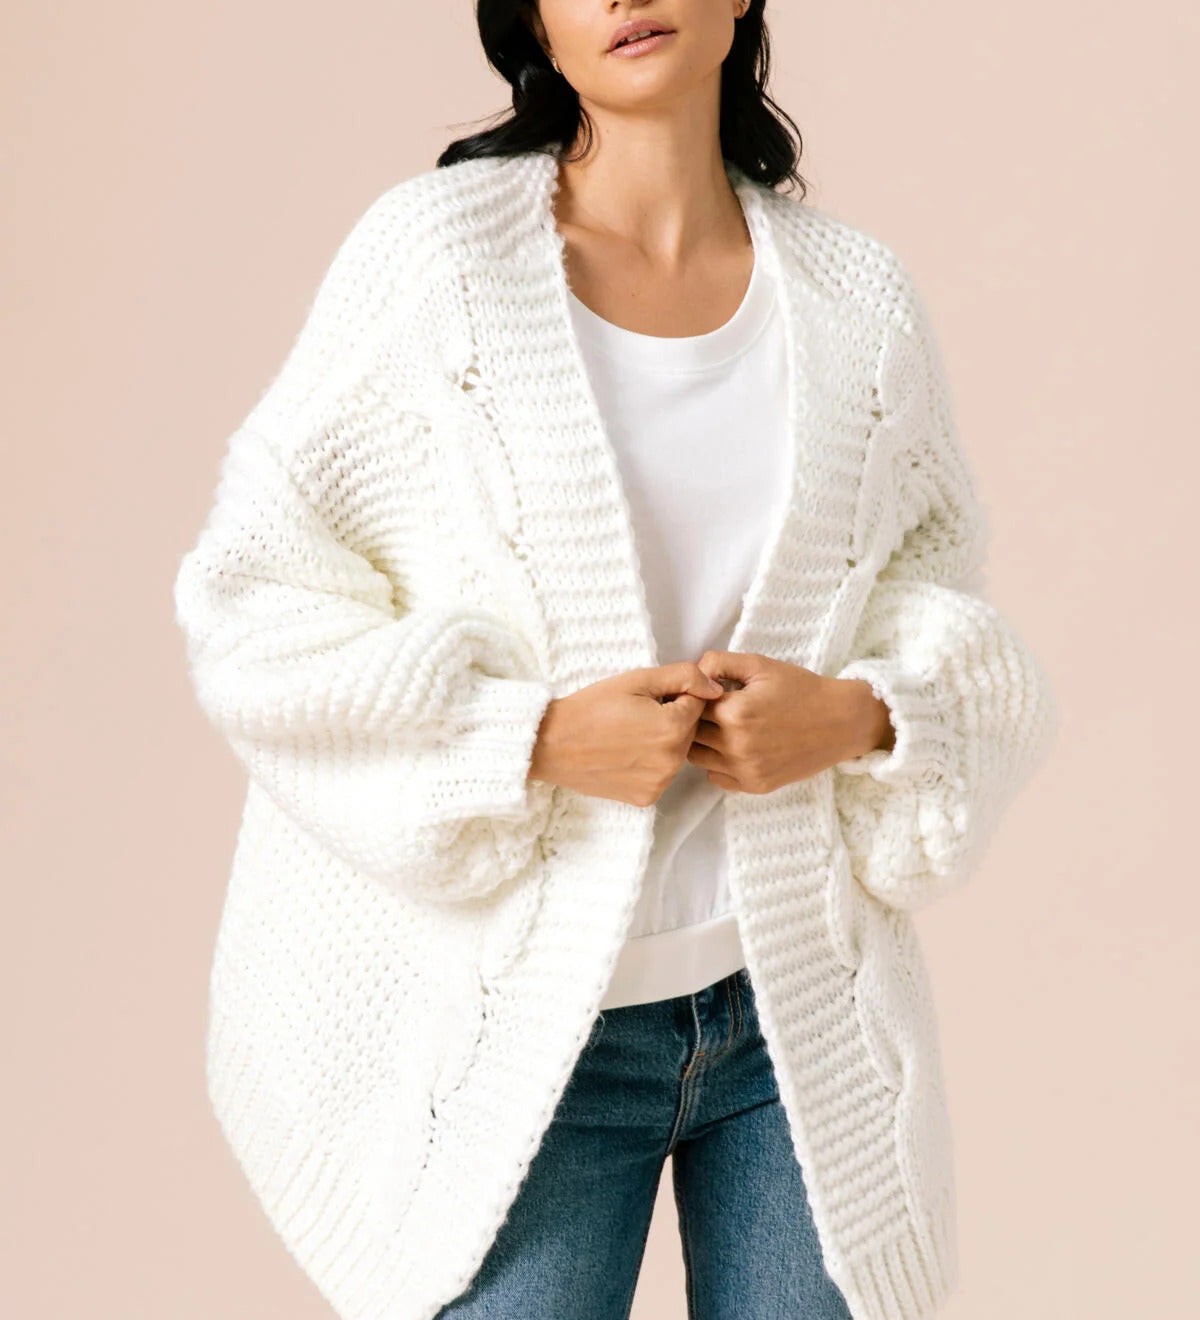 A model wearing a white knitted cardigan against a tan background. 